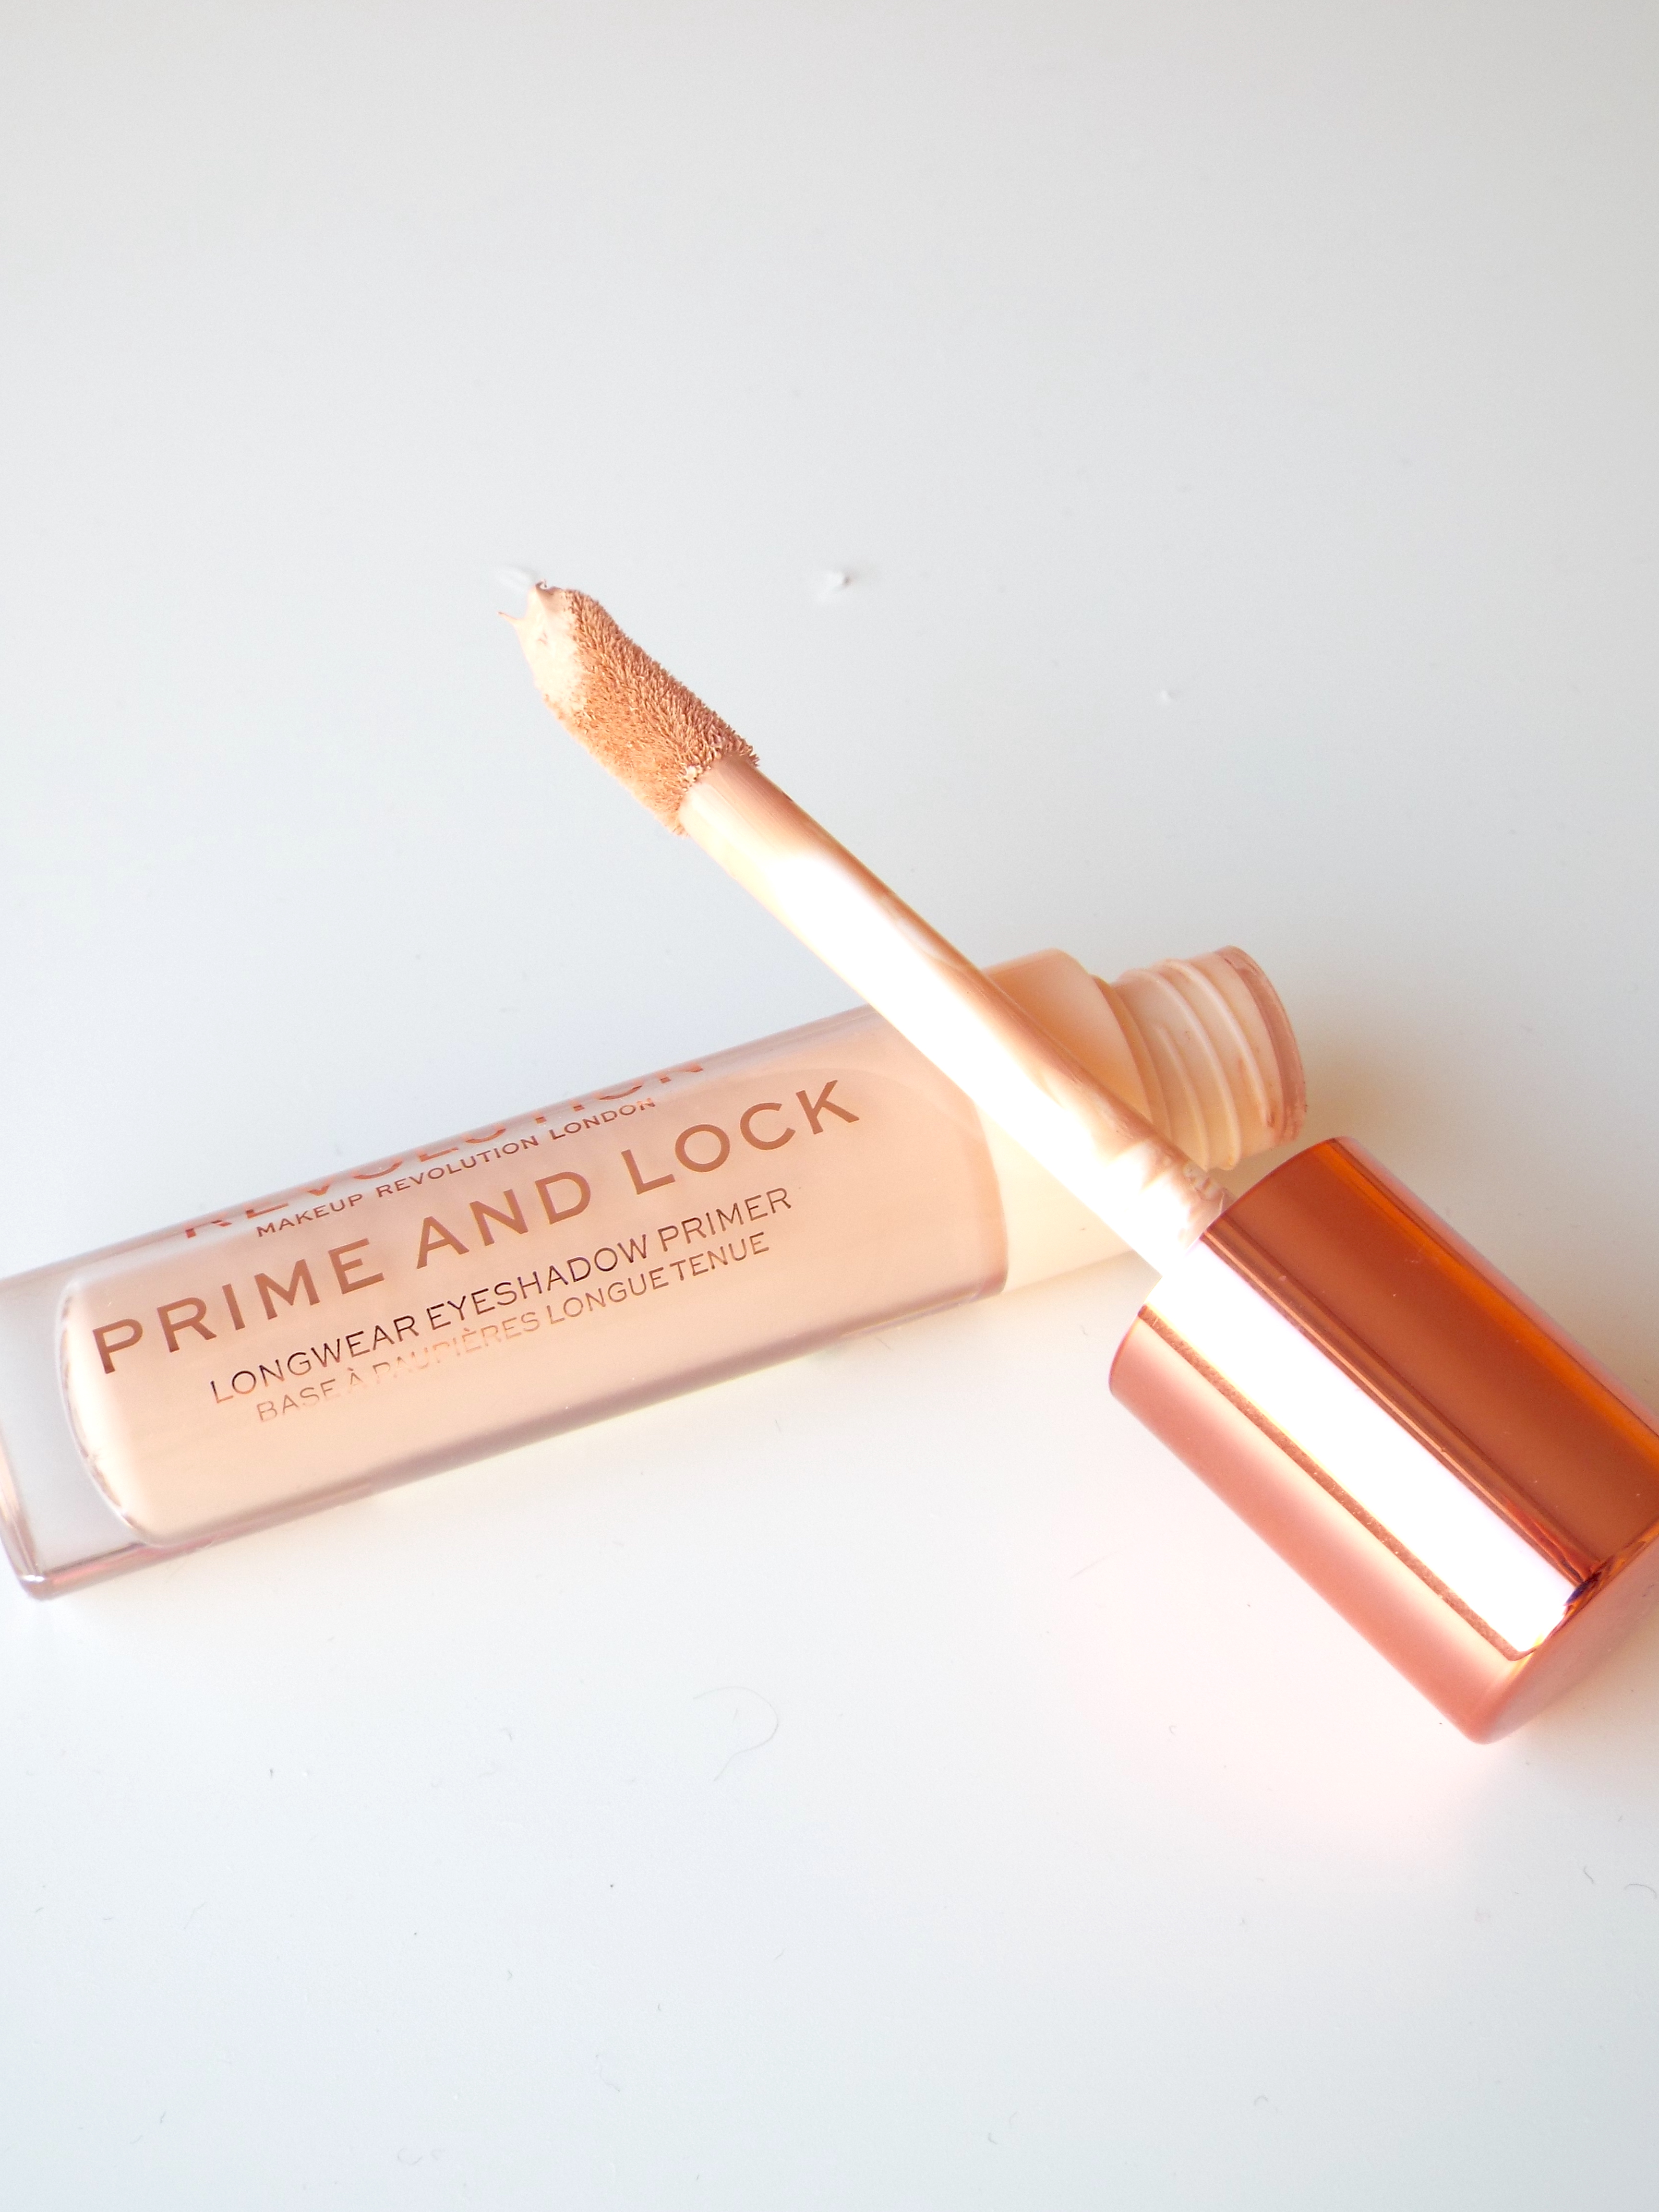 The product-coated doe foot applicator of the Makeup Revolution Prime & Lock Longwear Eyeshadow Primer, crossed over its clear plastic, rose gold bottle.